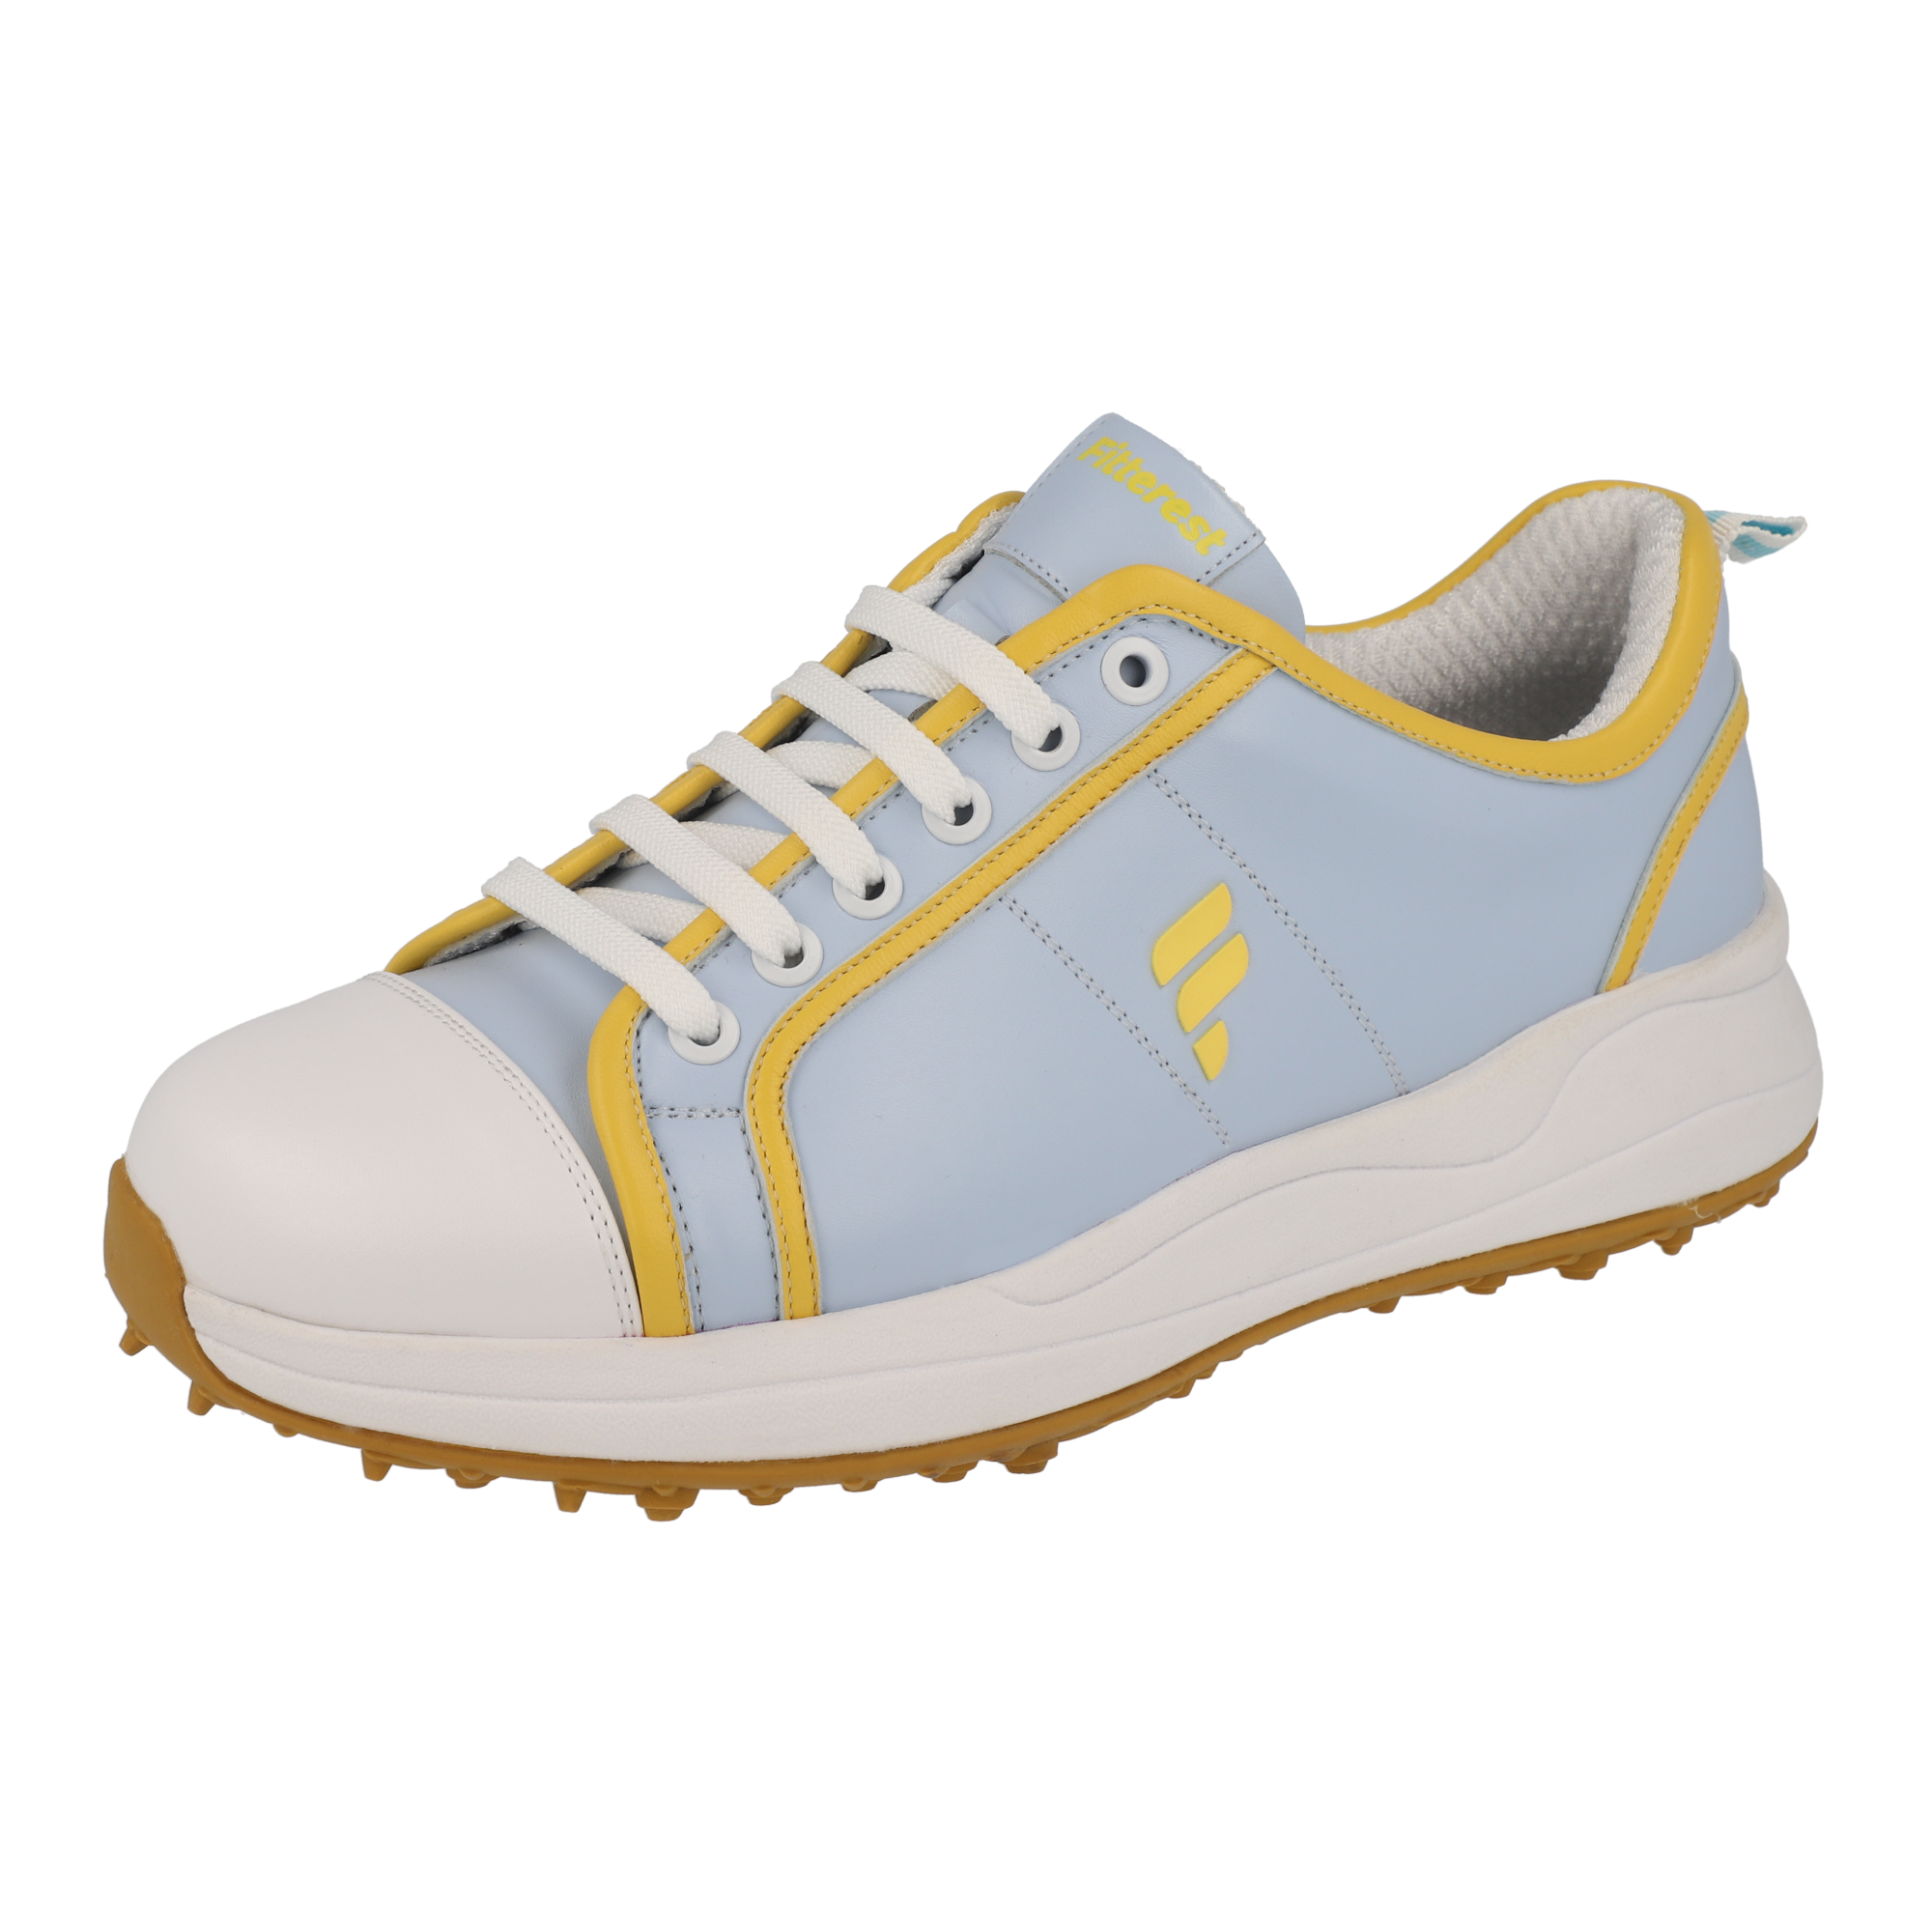 FITTEREST Spider Wave Golf Shoes for Women - FTR23 W SS SB210